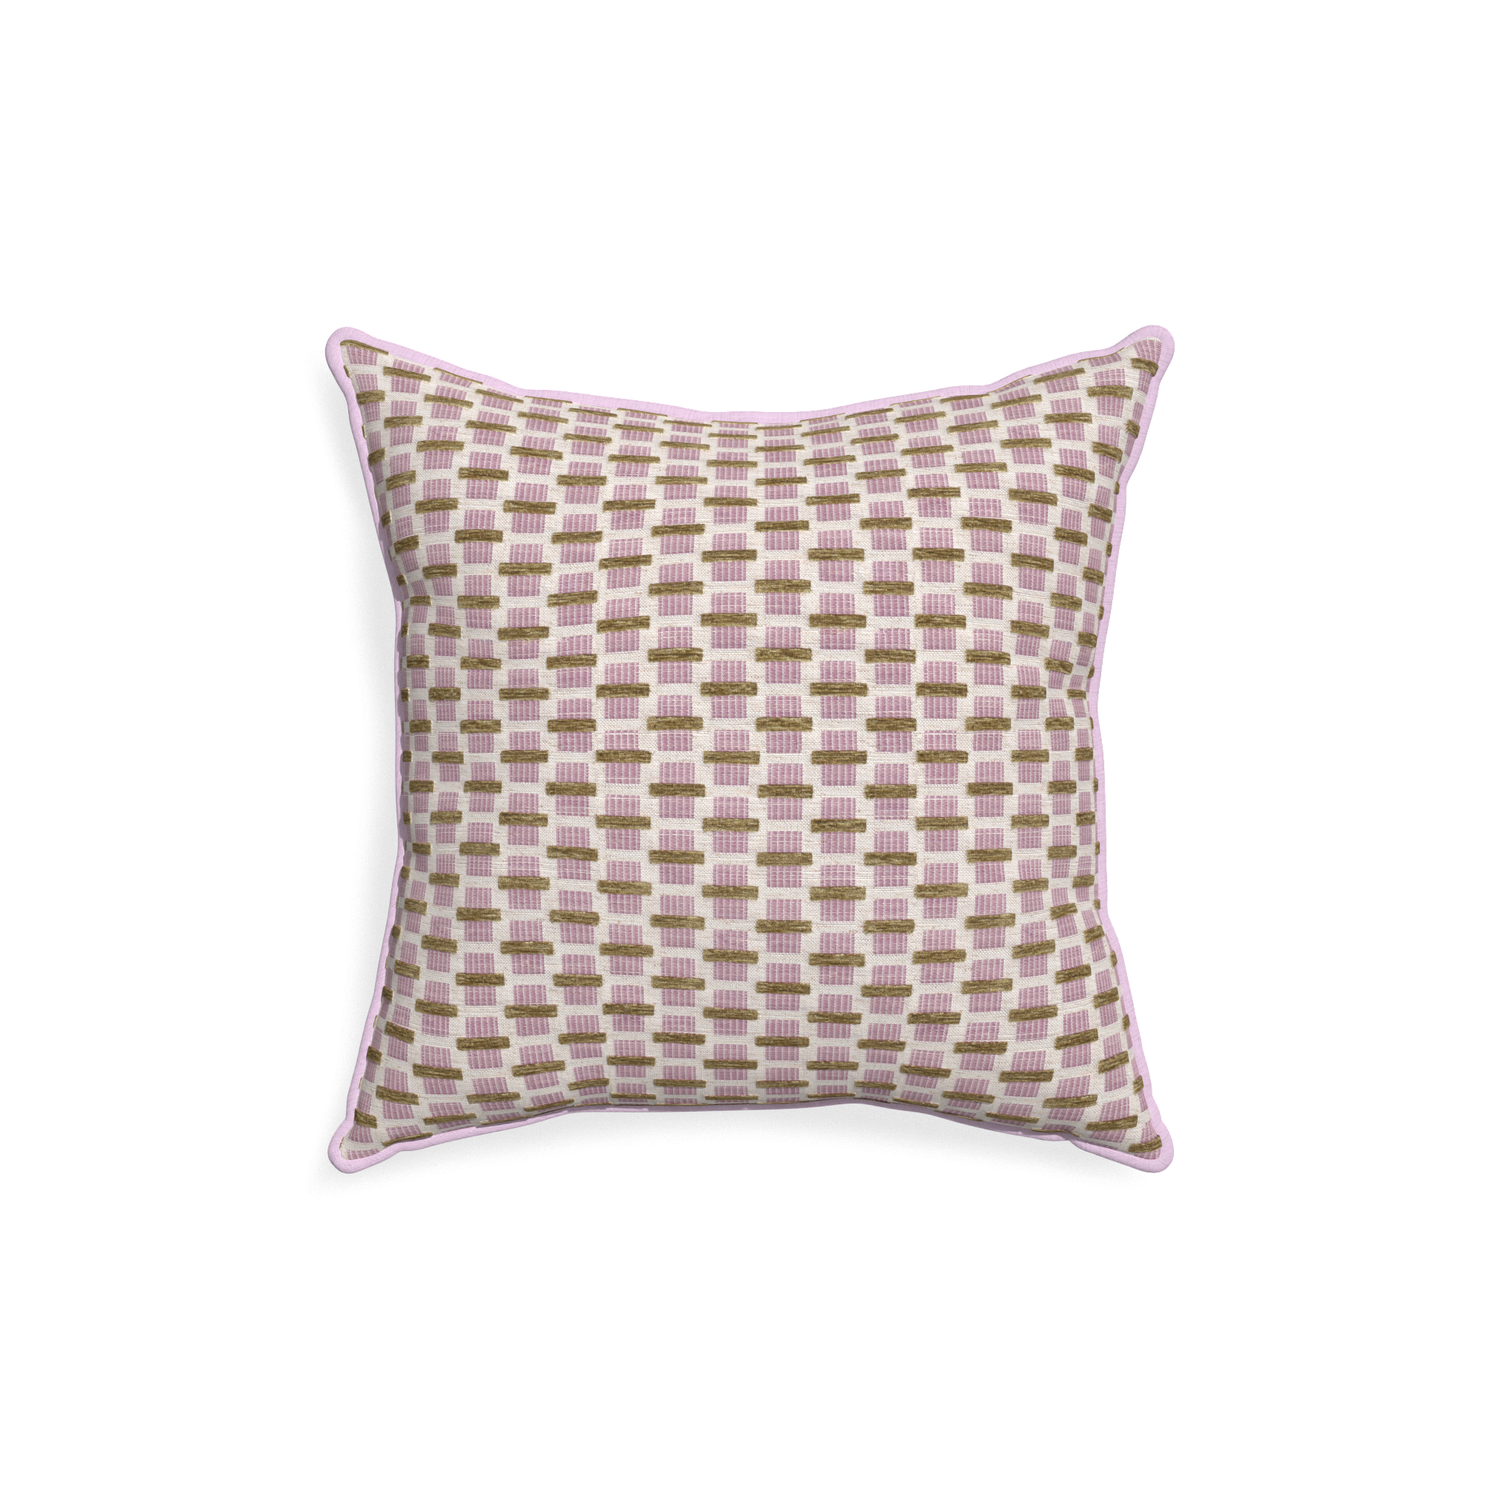 18-square willow orchid custom pink geometric chenillepillow with l piping on white background